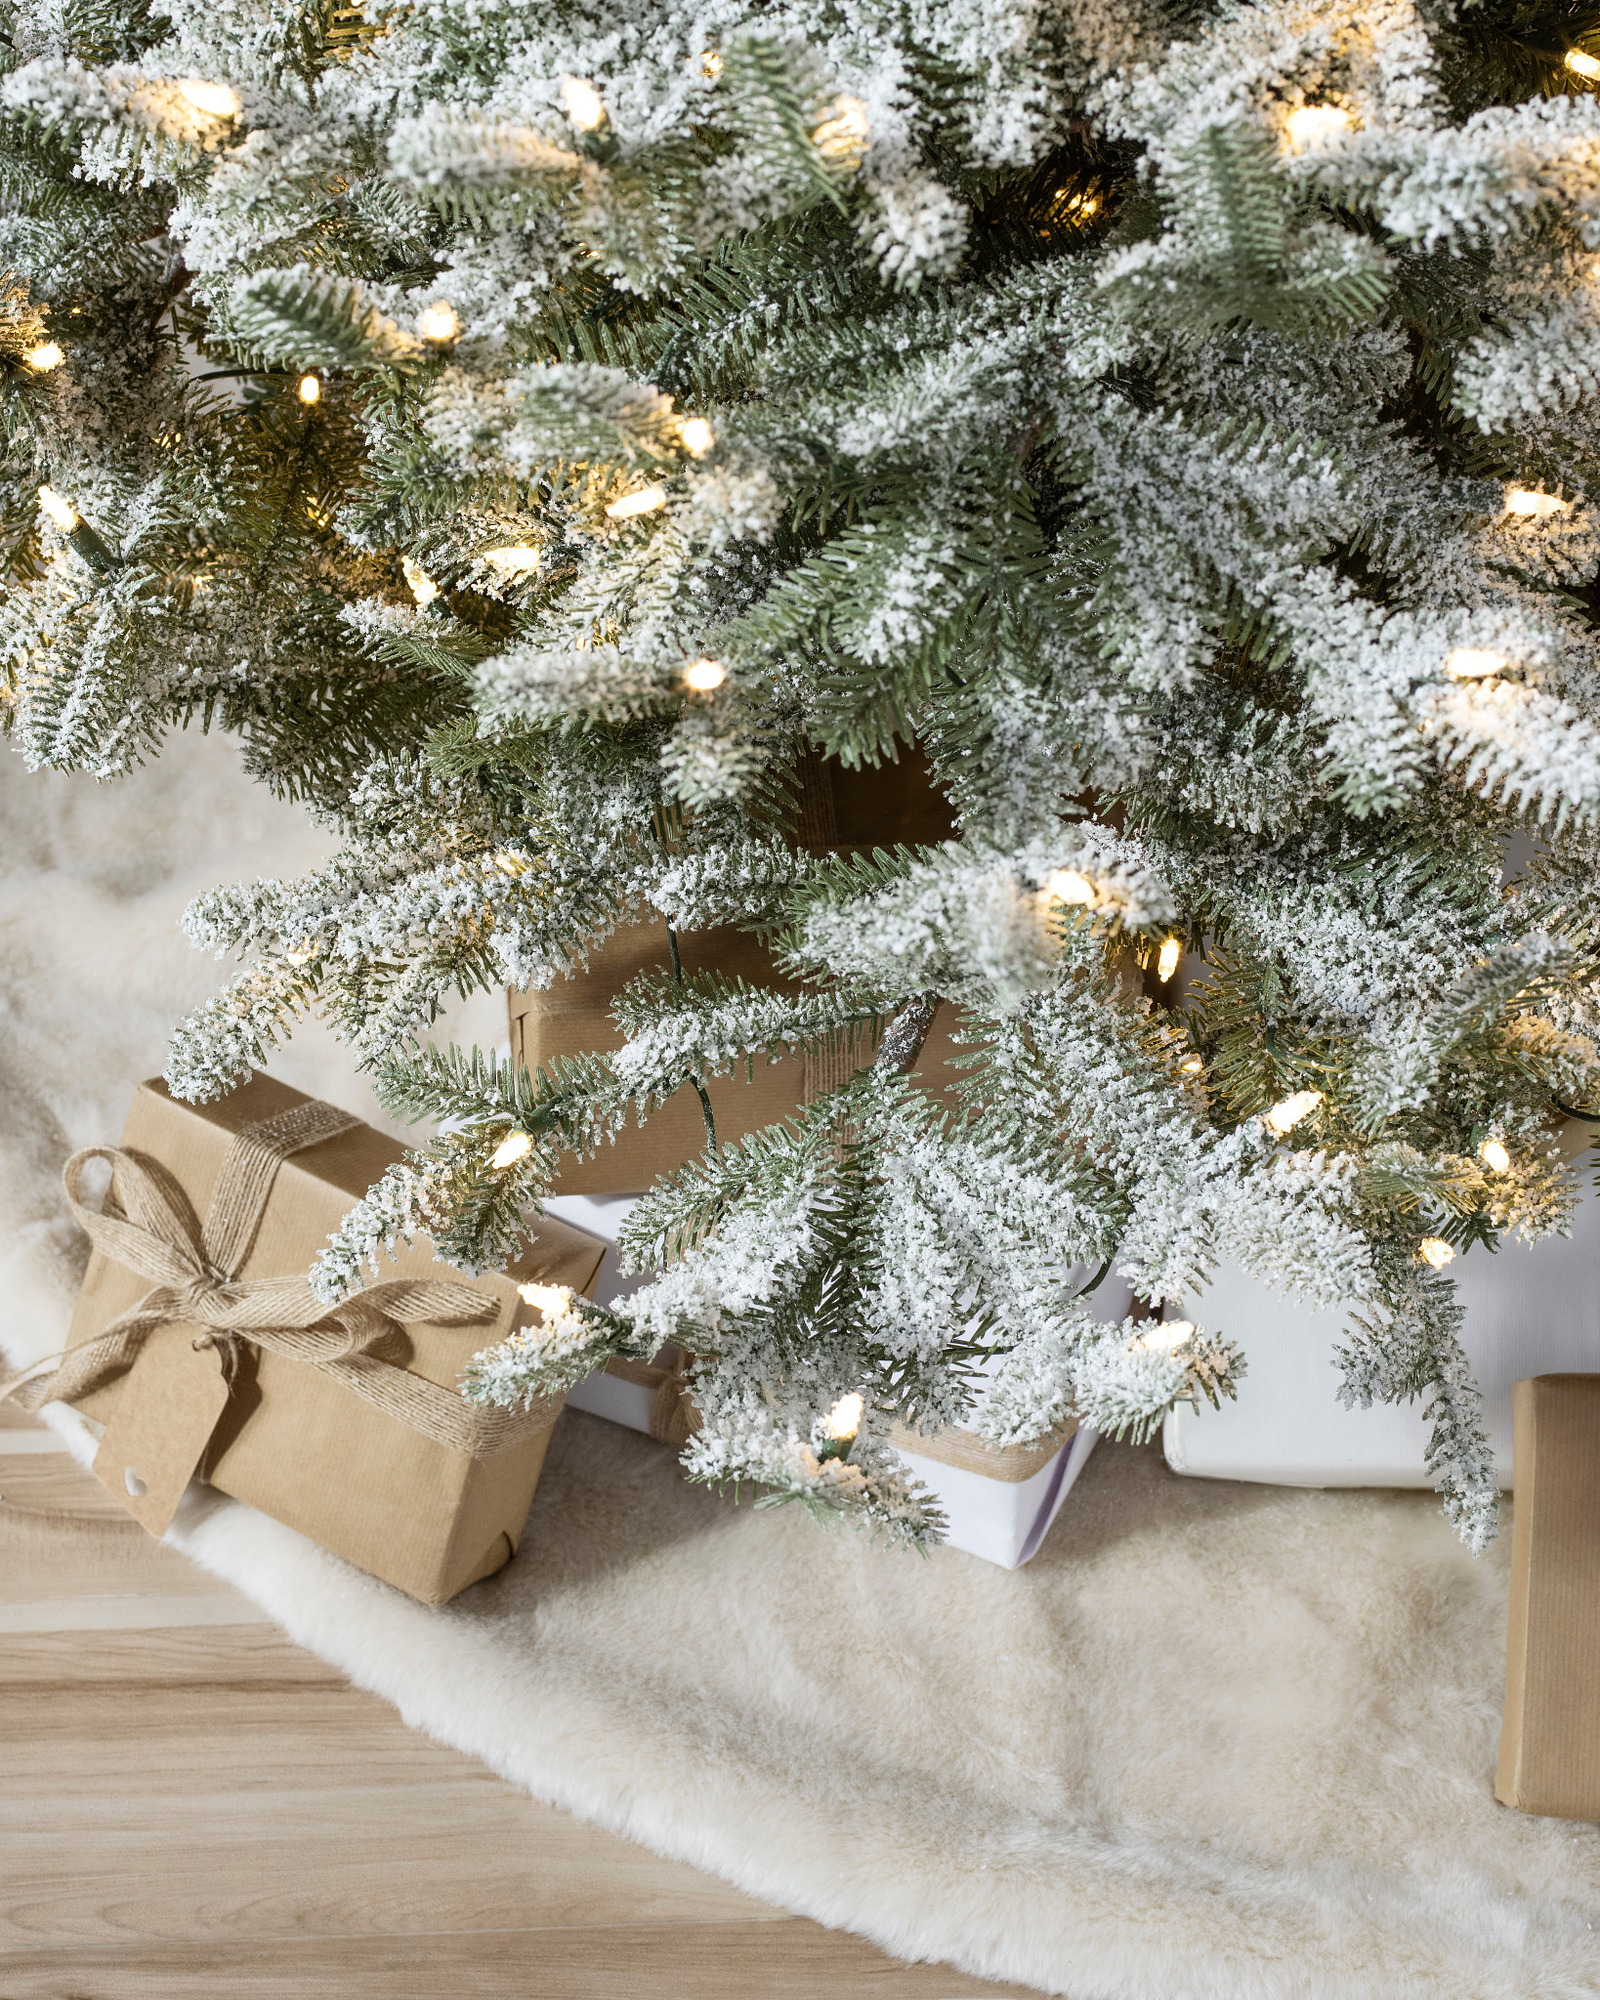 BELLE VOUS Thick White Garland - 10 m of Shiny Christmas Tree